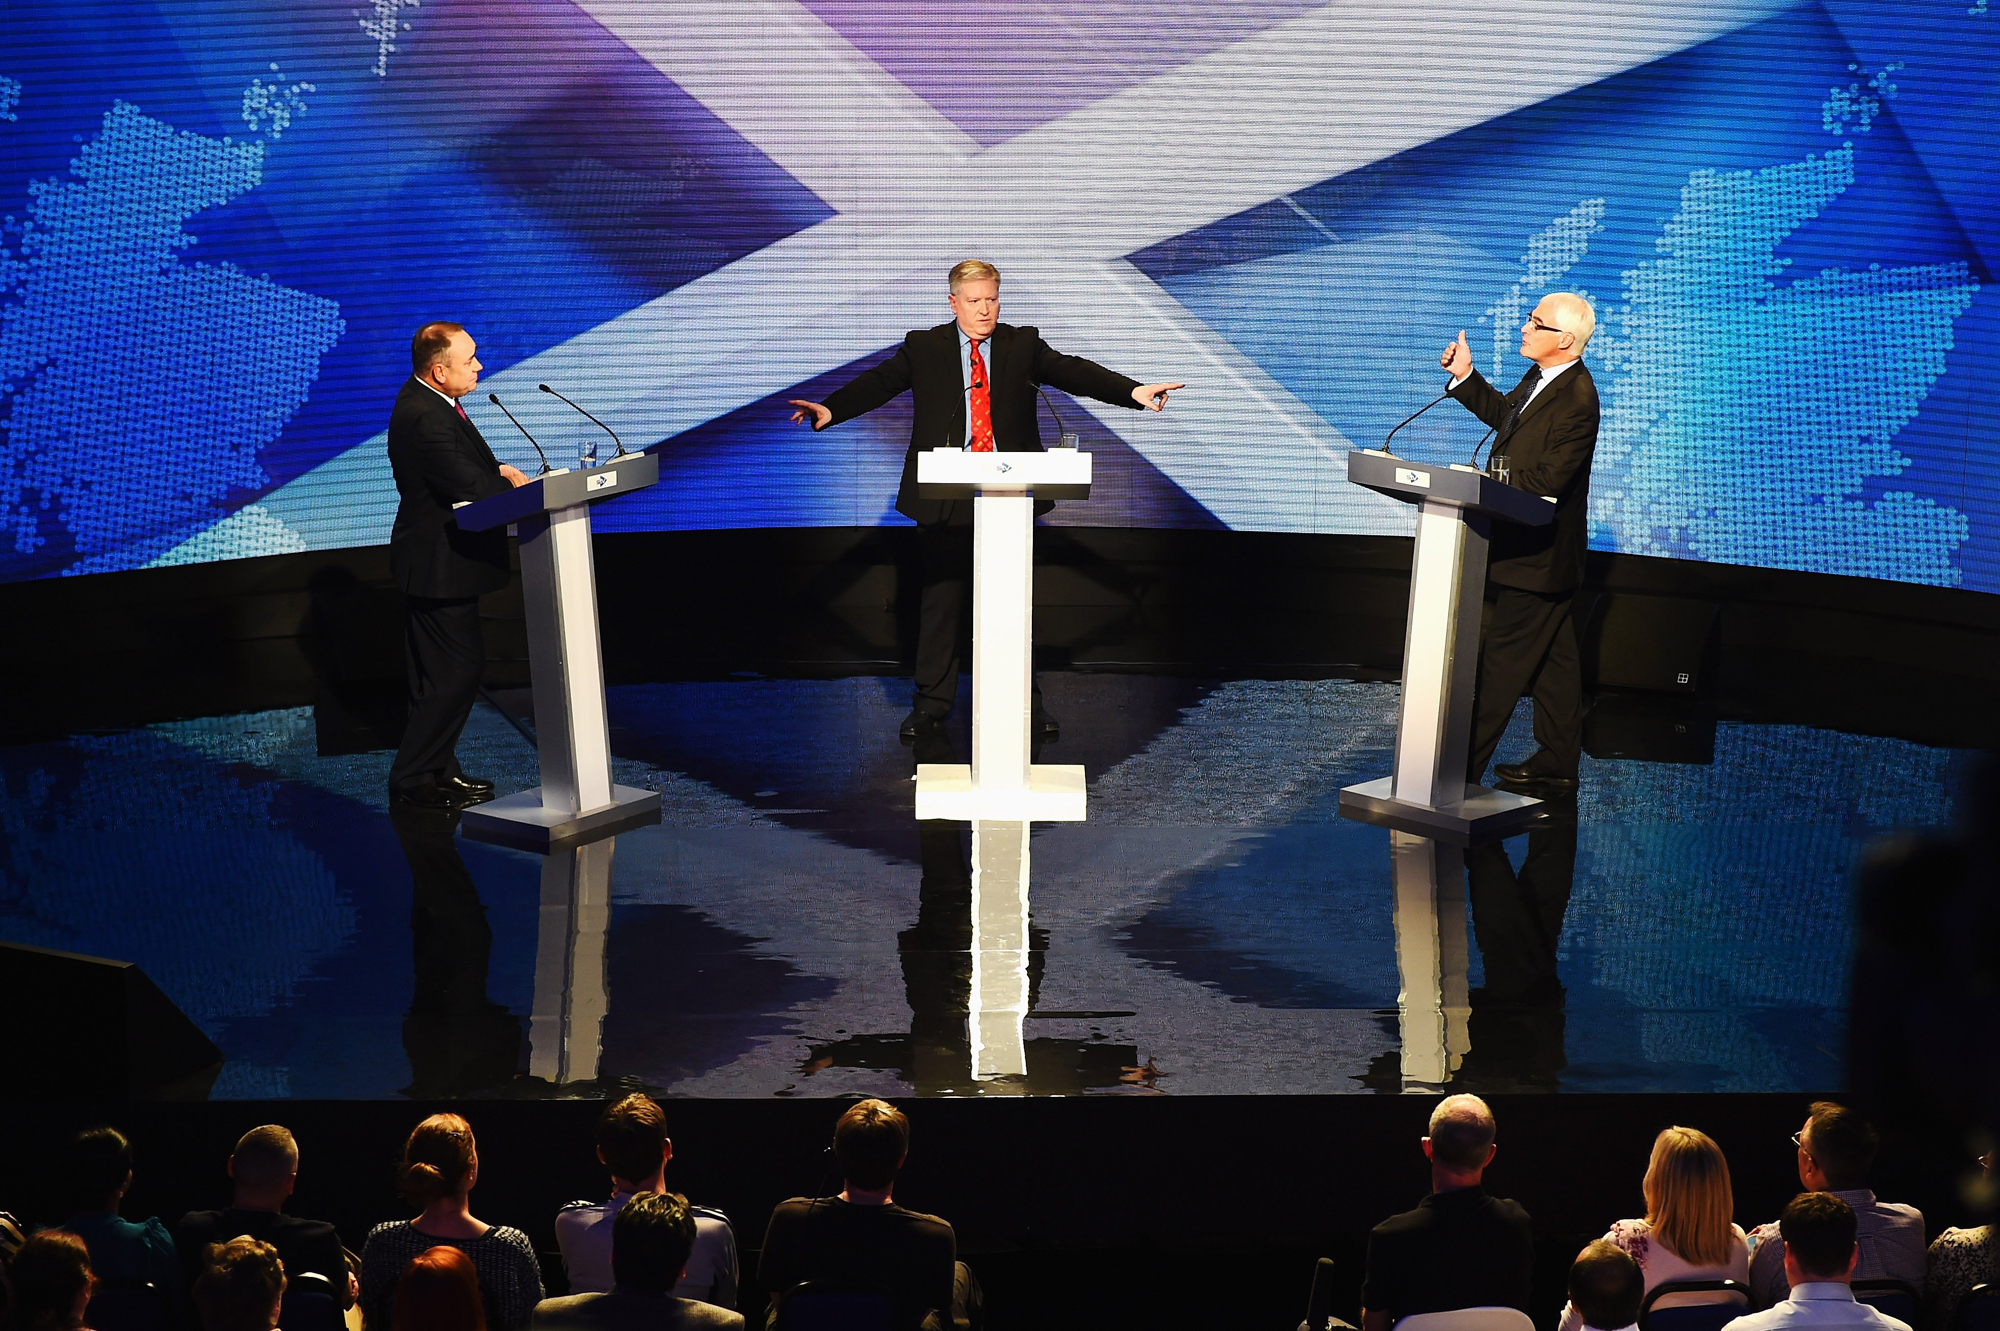 Alex Salmond, First Minister of Scotland and Alistair Darling, chairman of Better Together take part in a live television debate hosted by Bernard Ponsonby at the Royal Conservatoire of Scotland on August 5, 2014 in Glasgow, Scotland. (Jeff J Mitchell—Getty Images)